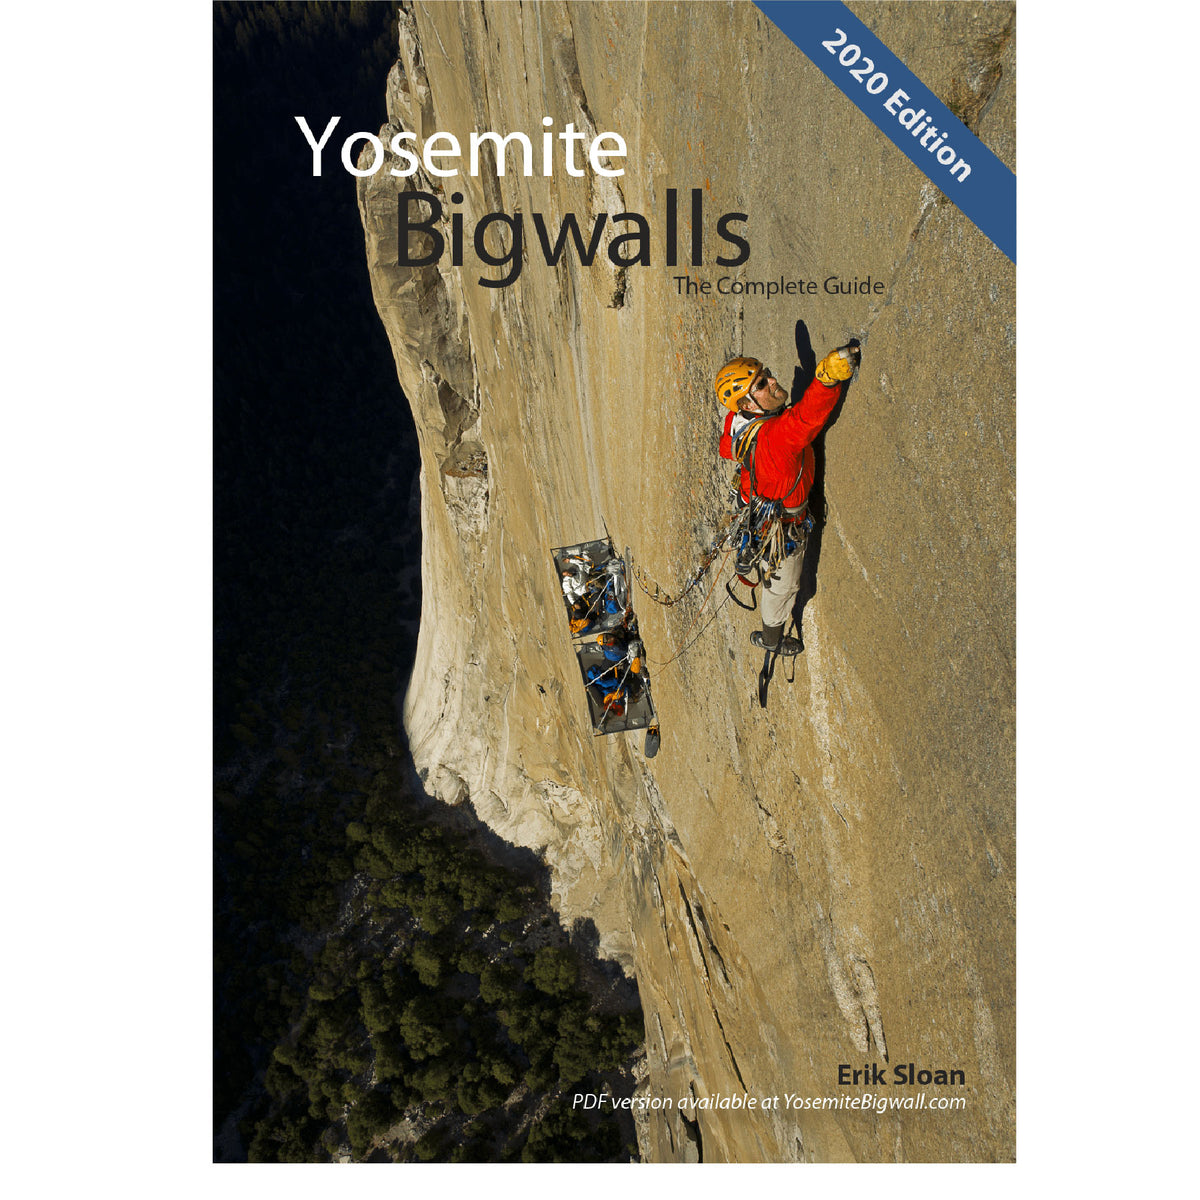 the cover of the yosemite big wall book